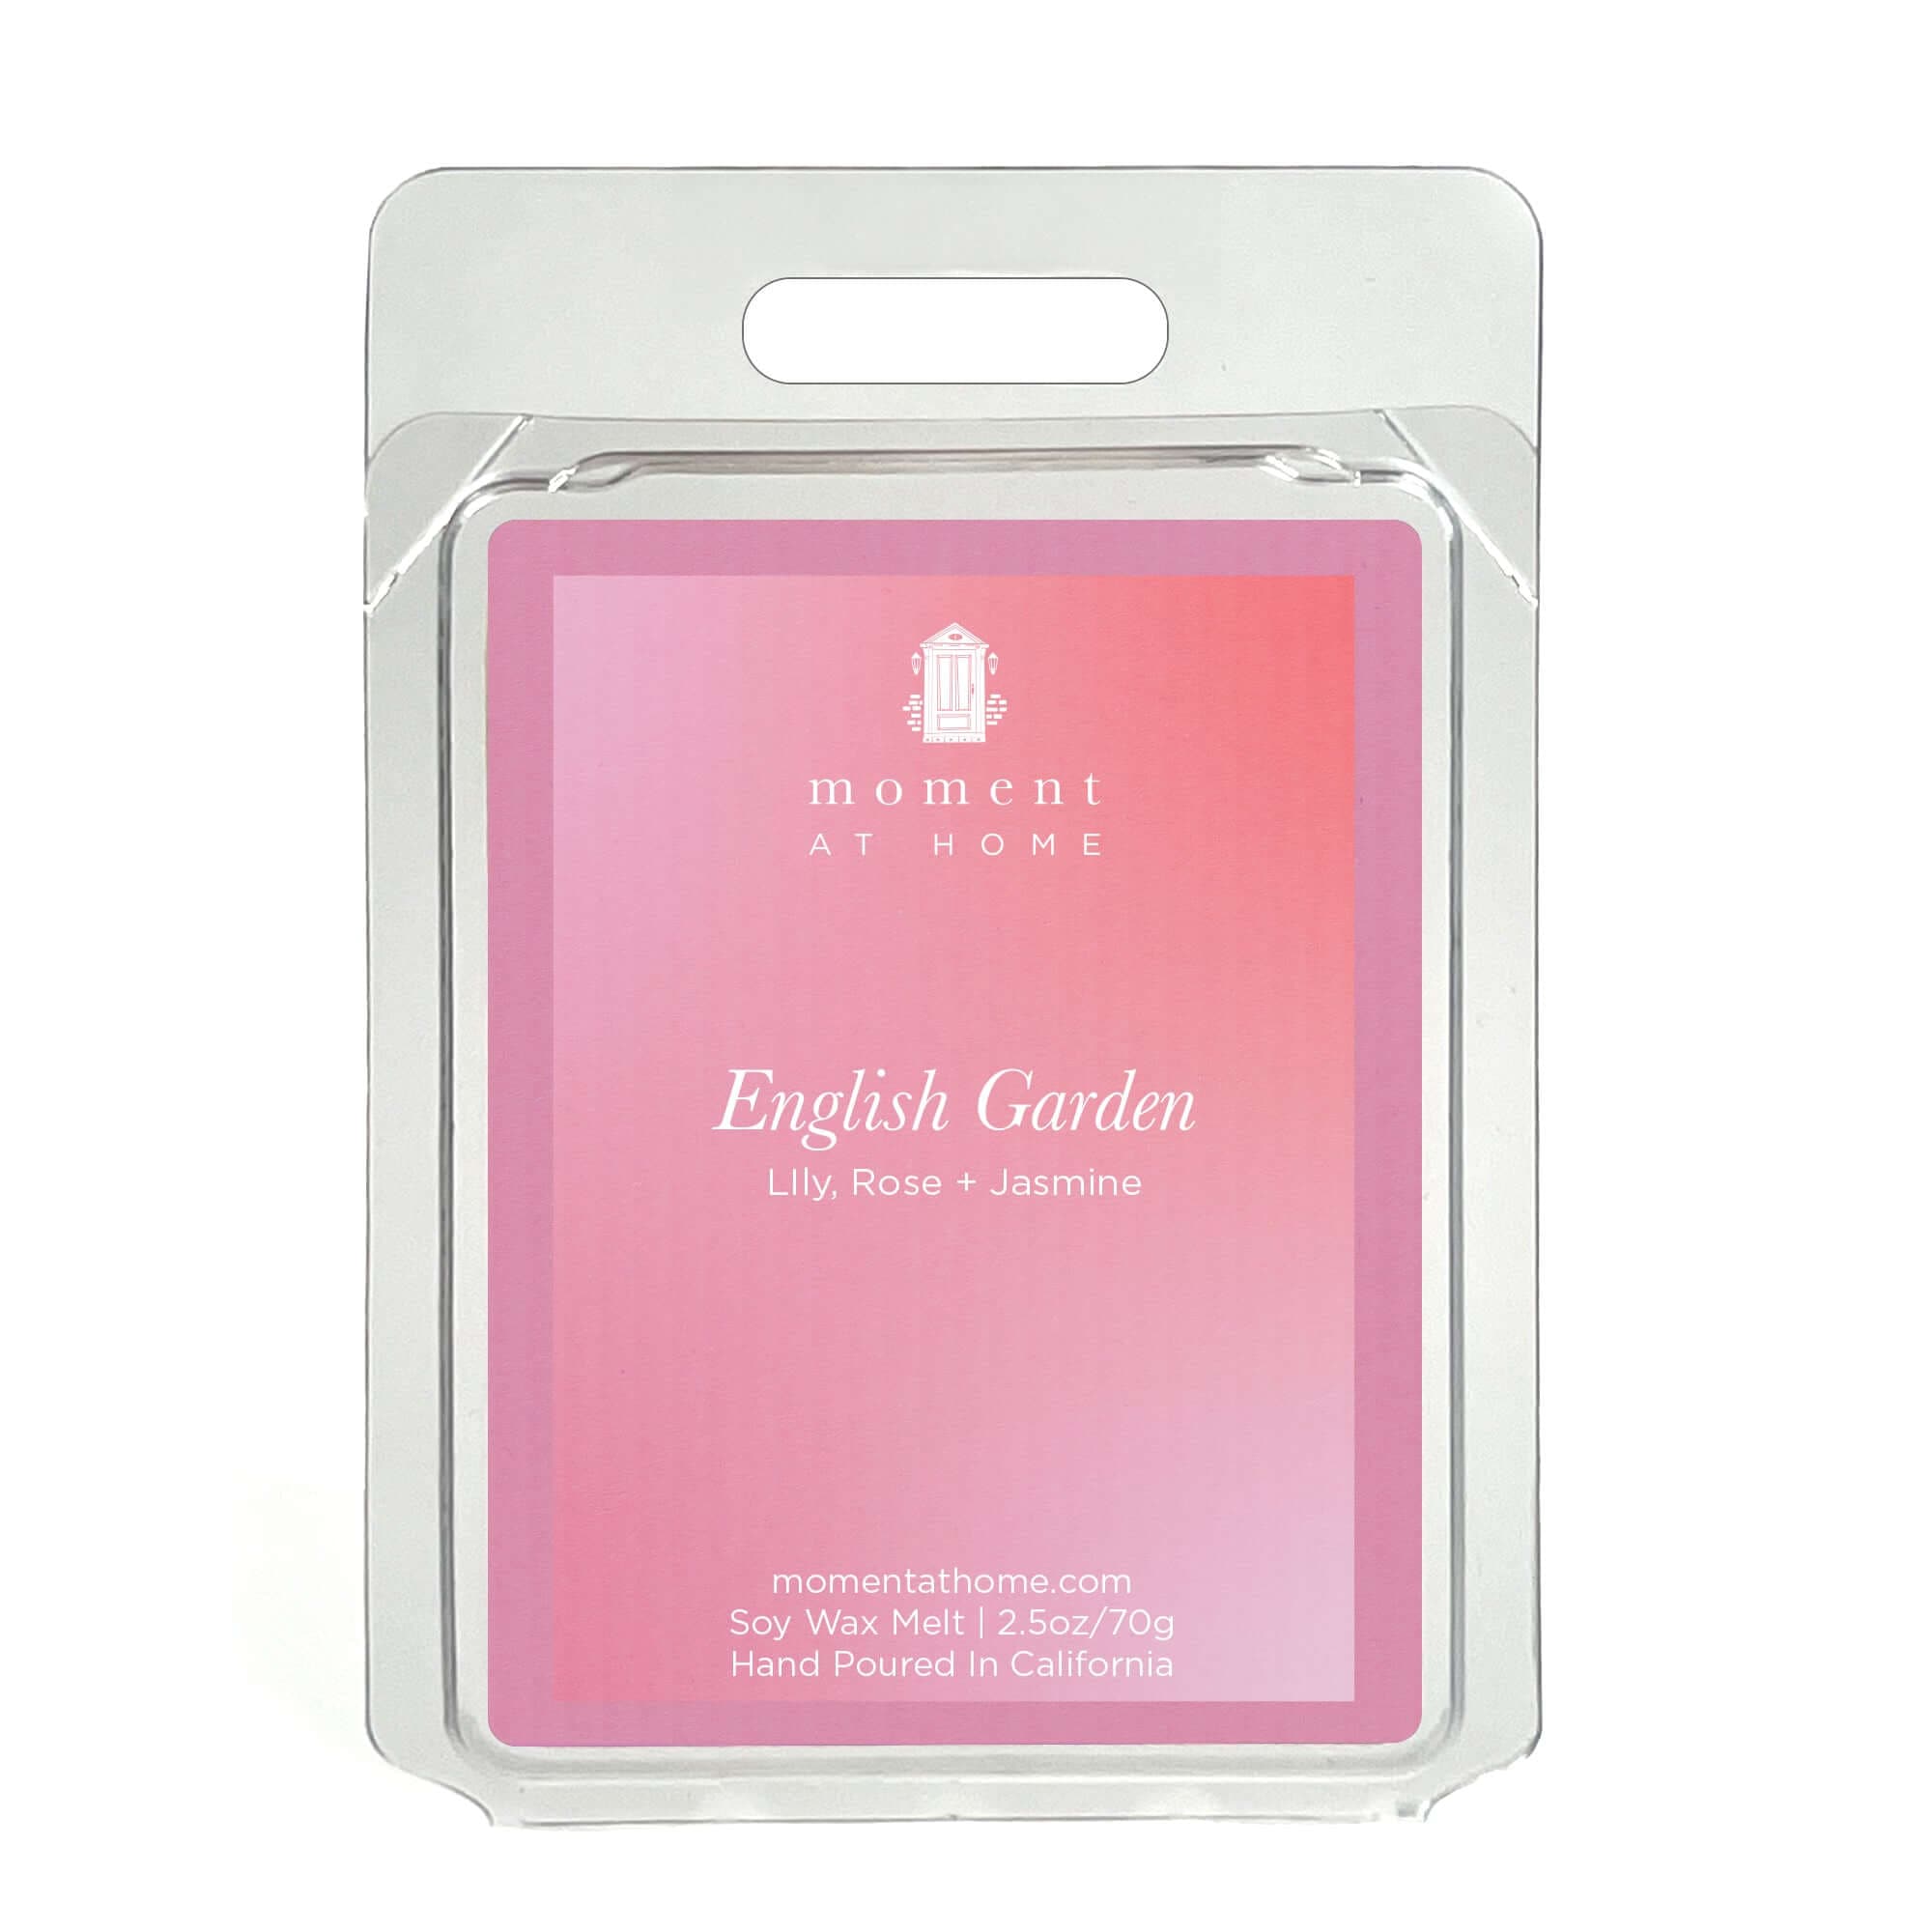 The English Garden Scented Soy Wax Melts